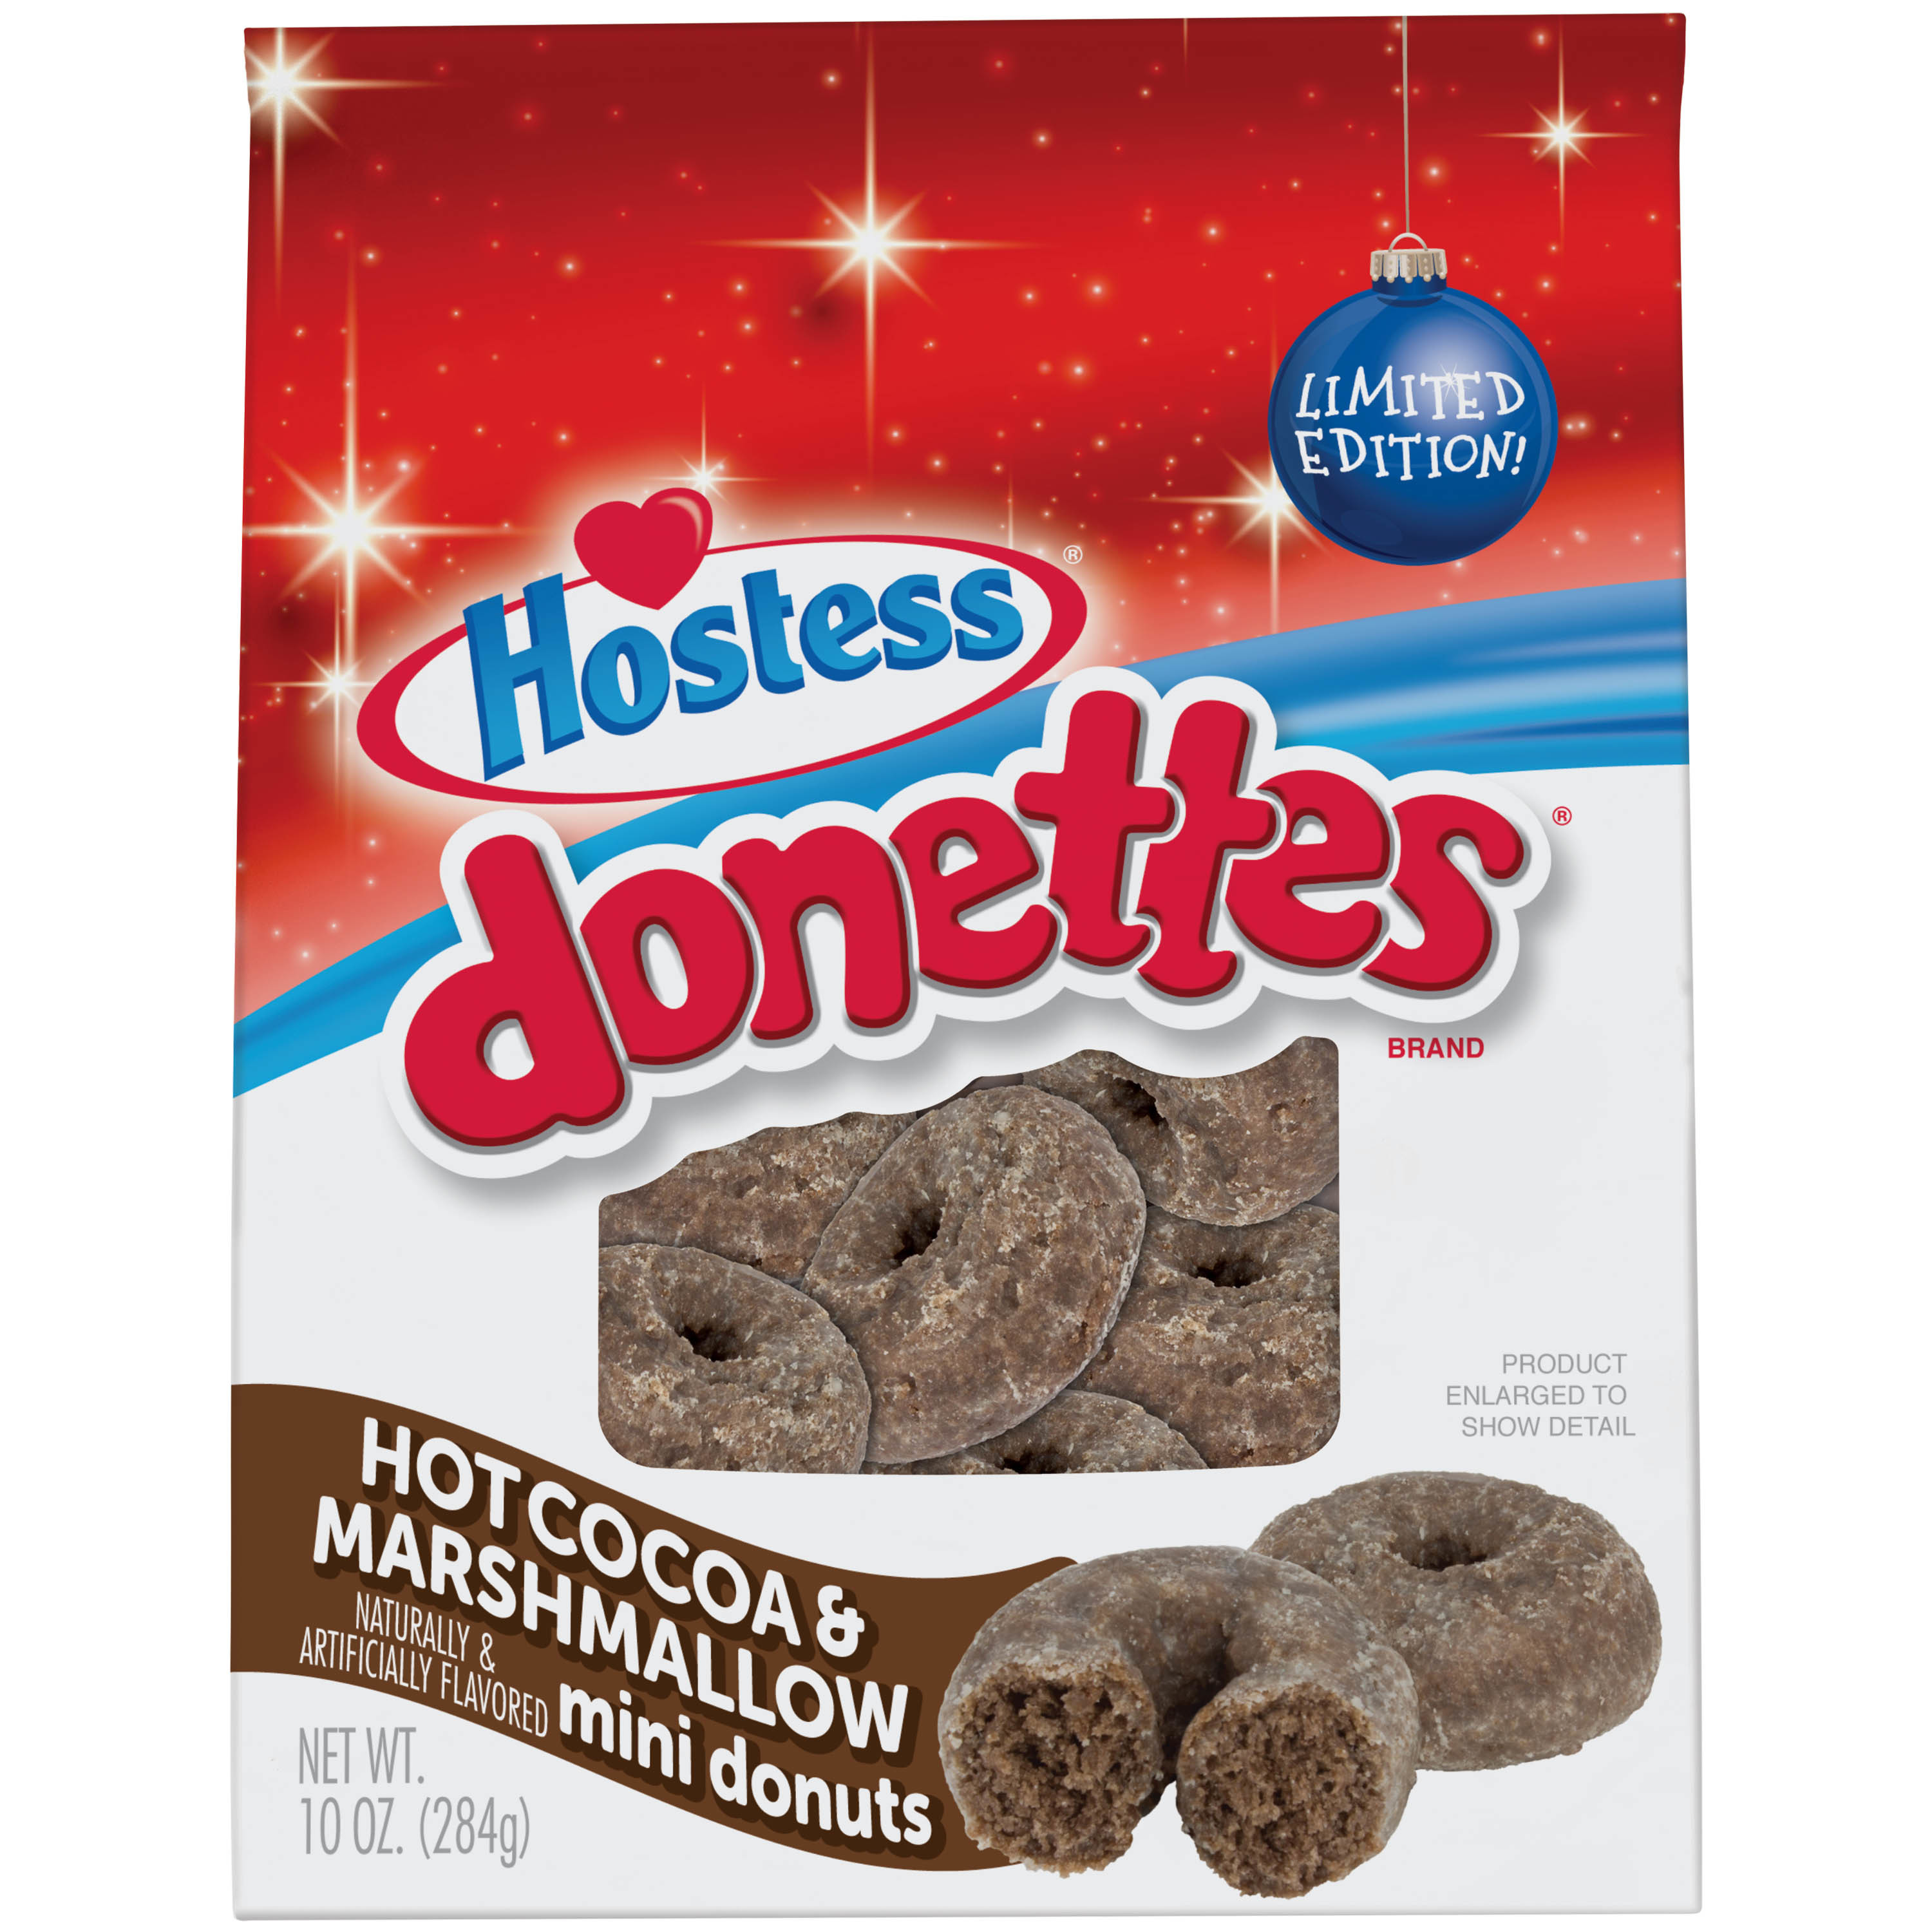 HOSTESS Hot Cocoa & Marshmallow Flavored DONETTES Donuts Bag, 10 oz - image 1 of 10